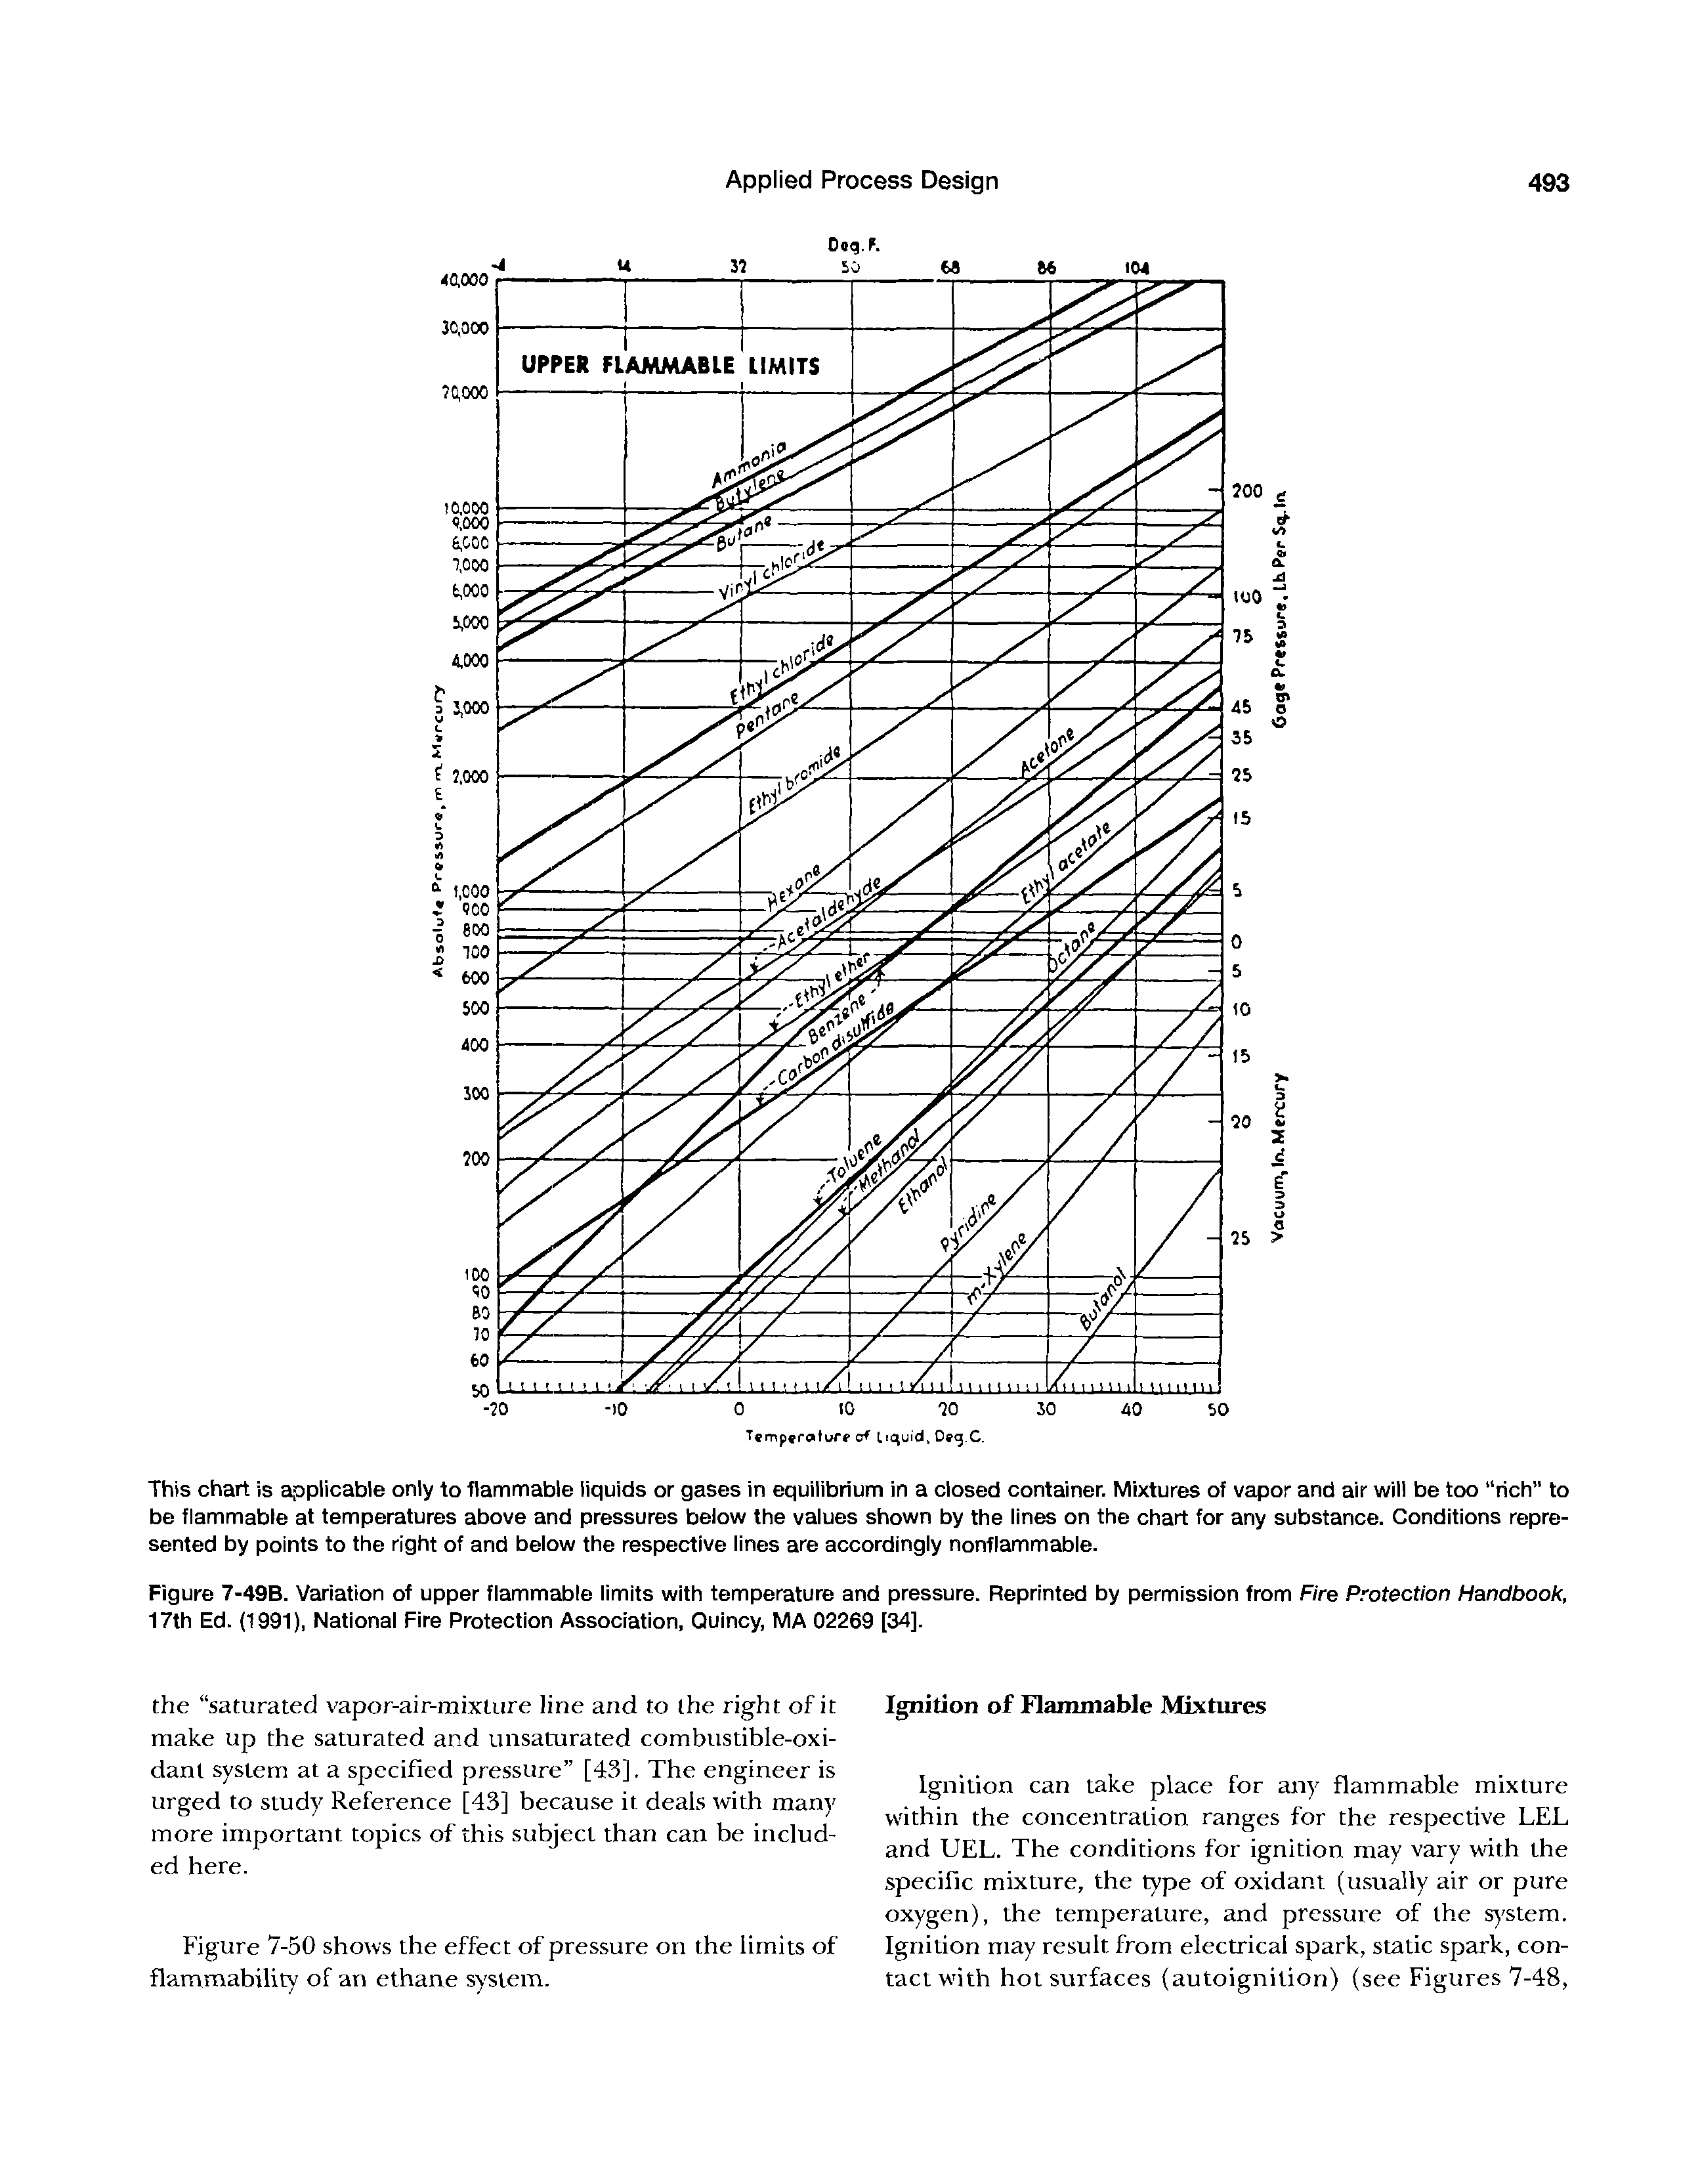 Figure 7-49B. Variation of upper flammable limits with temperature and pressure. Reprinted by permission from Fire Protection Handbook, 17th Ed. (1991), National Fire Protection Association, Quincy, MA 02269 [34].